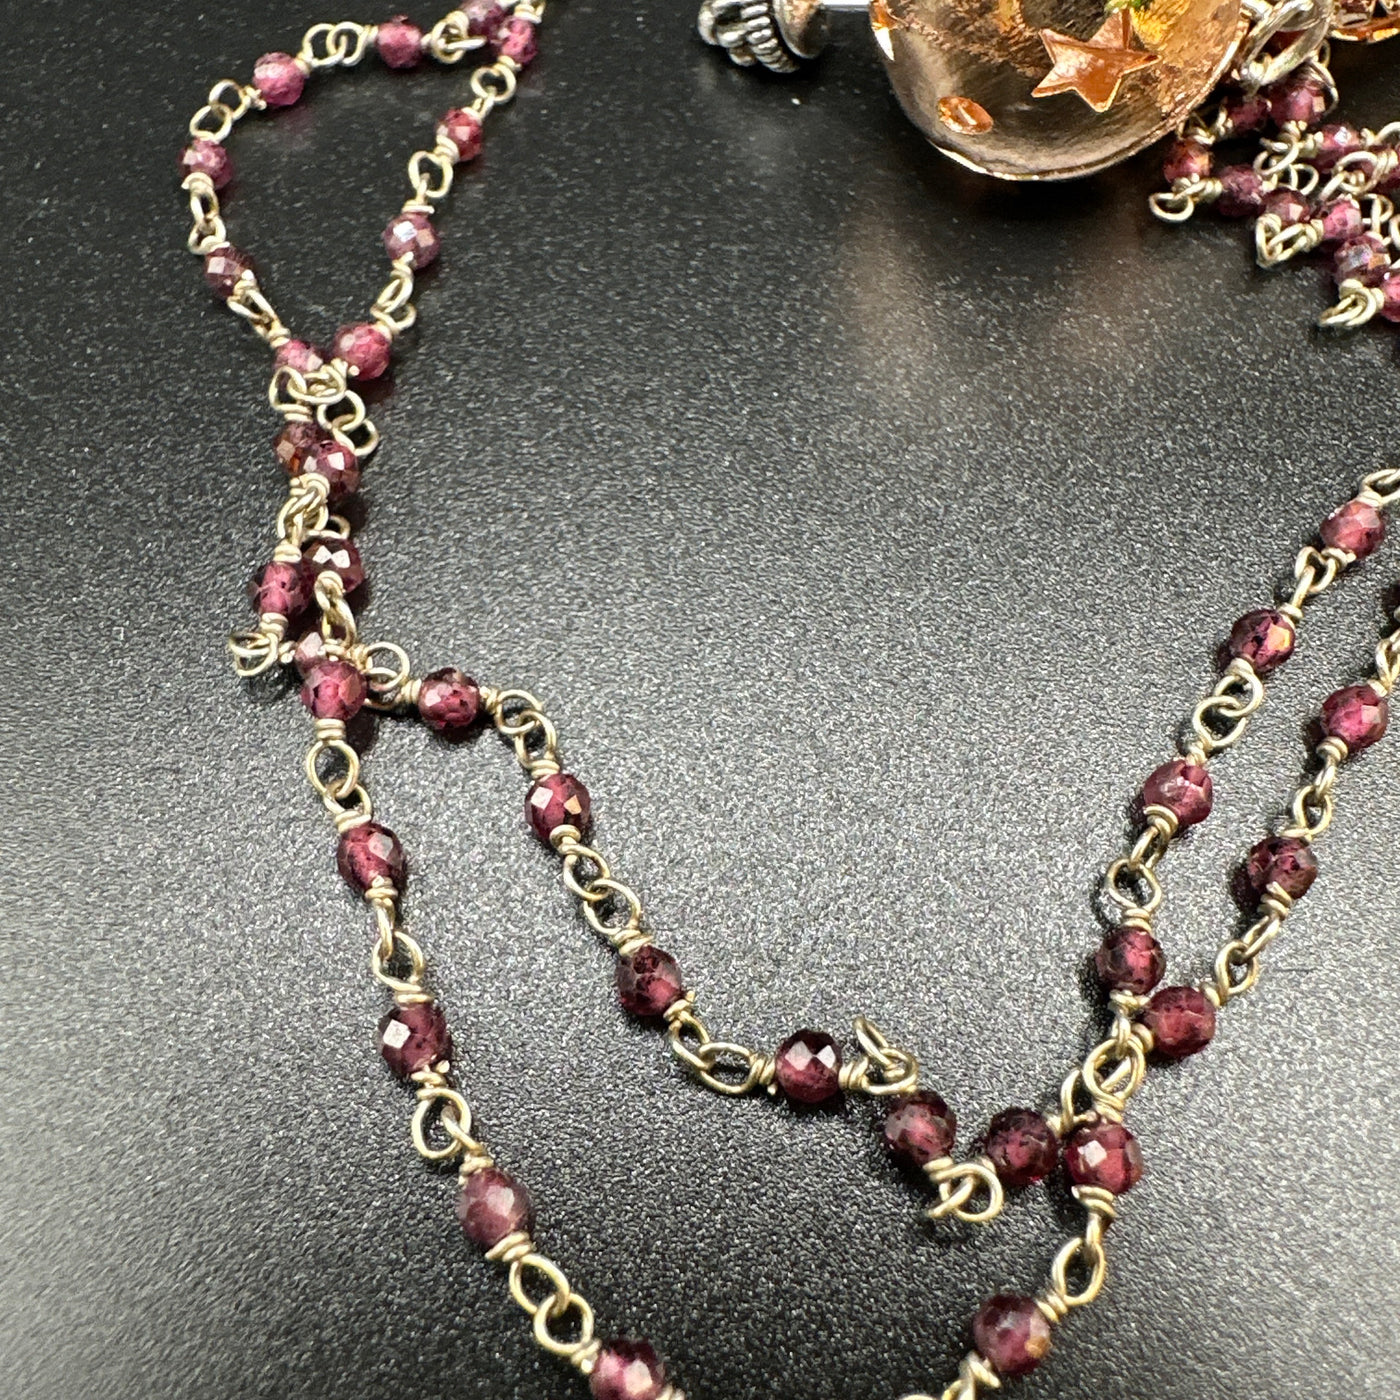 Scarf long necklace silver 925 with violet beads and sparkling traphorated spheres pendant